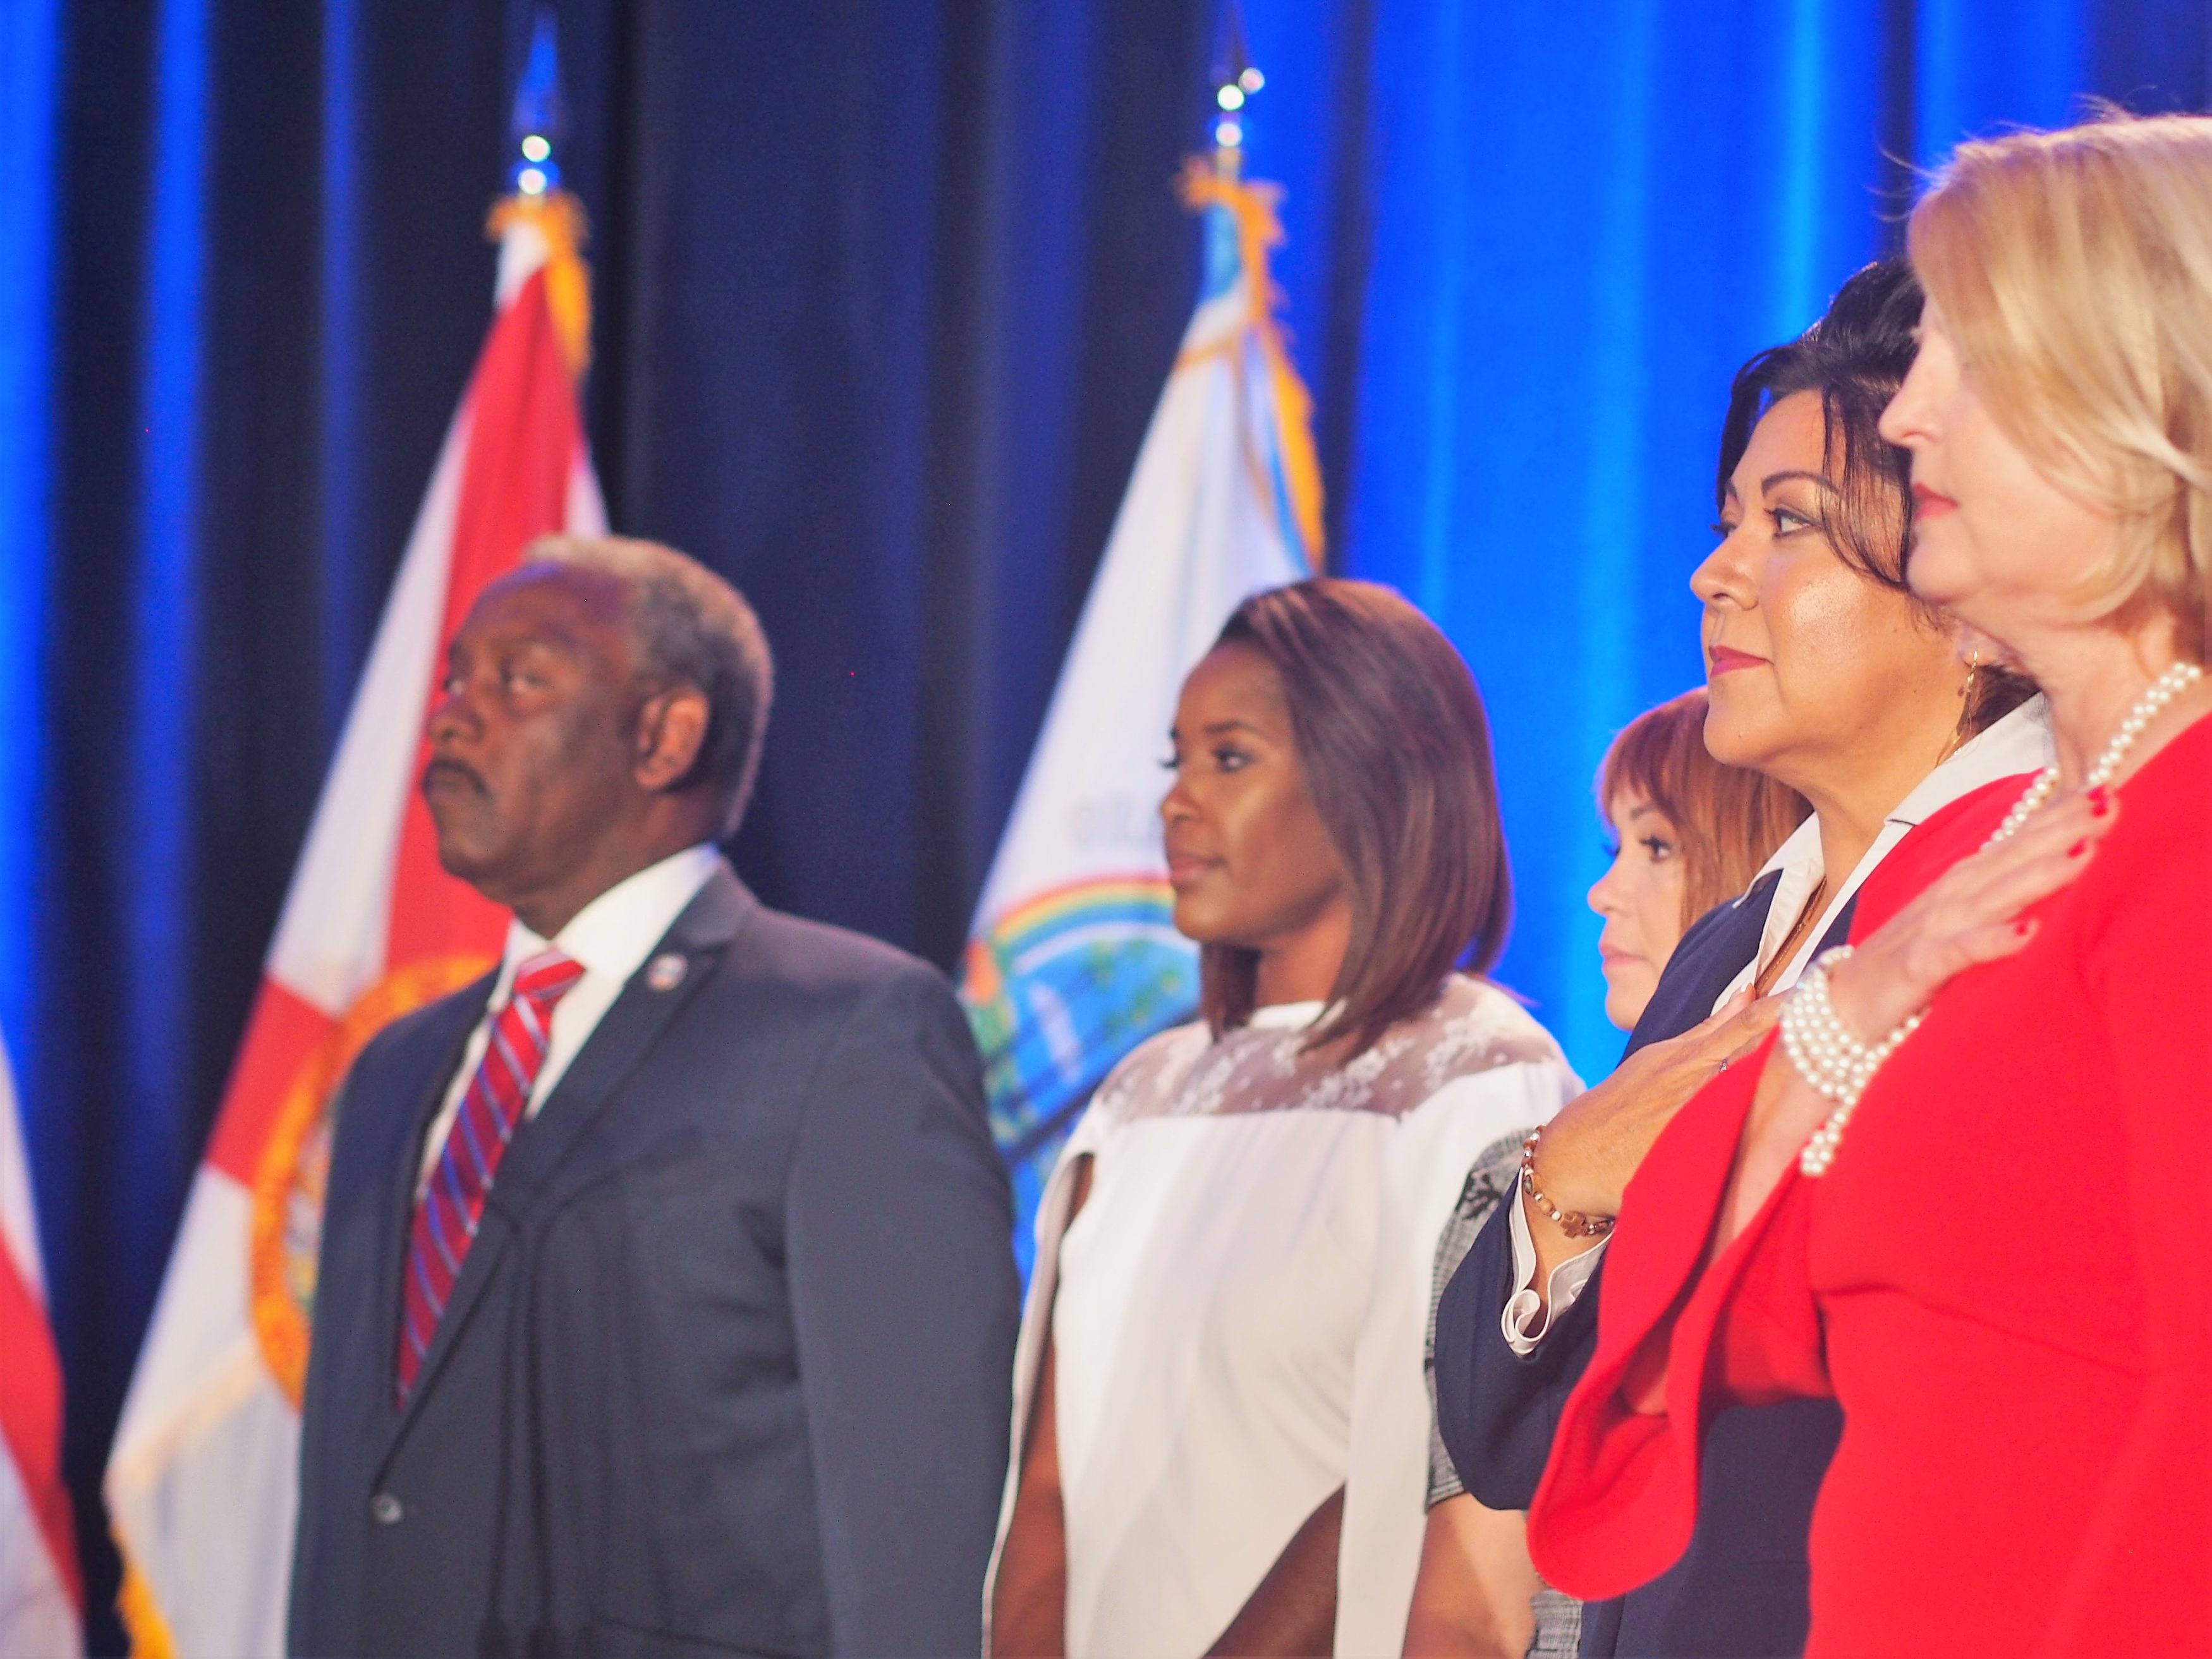 Demings-and-Commissioners-3500x2625.jpg